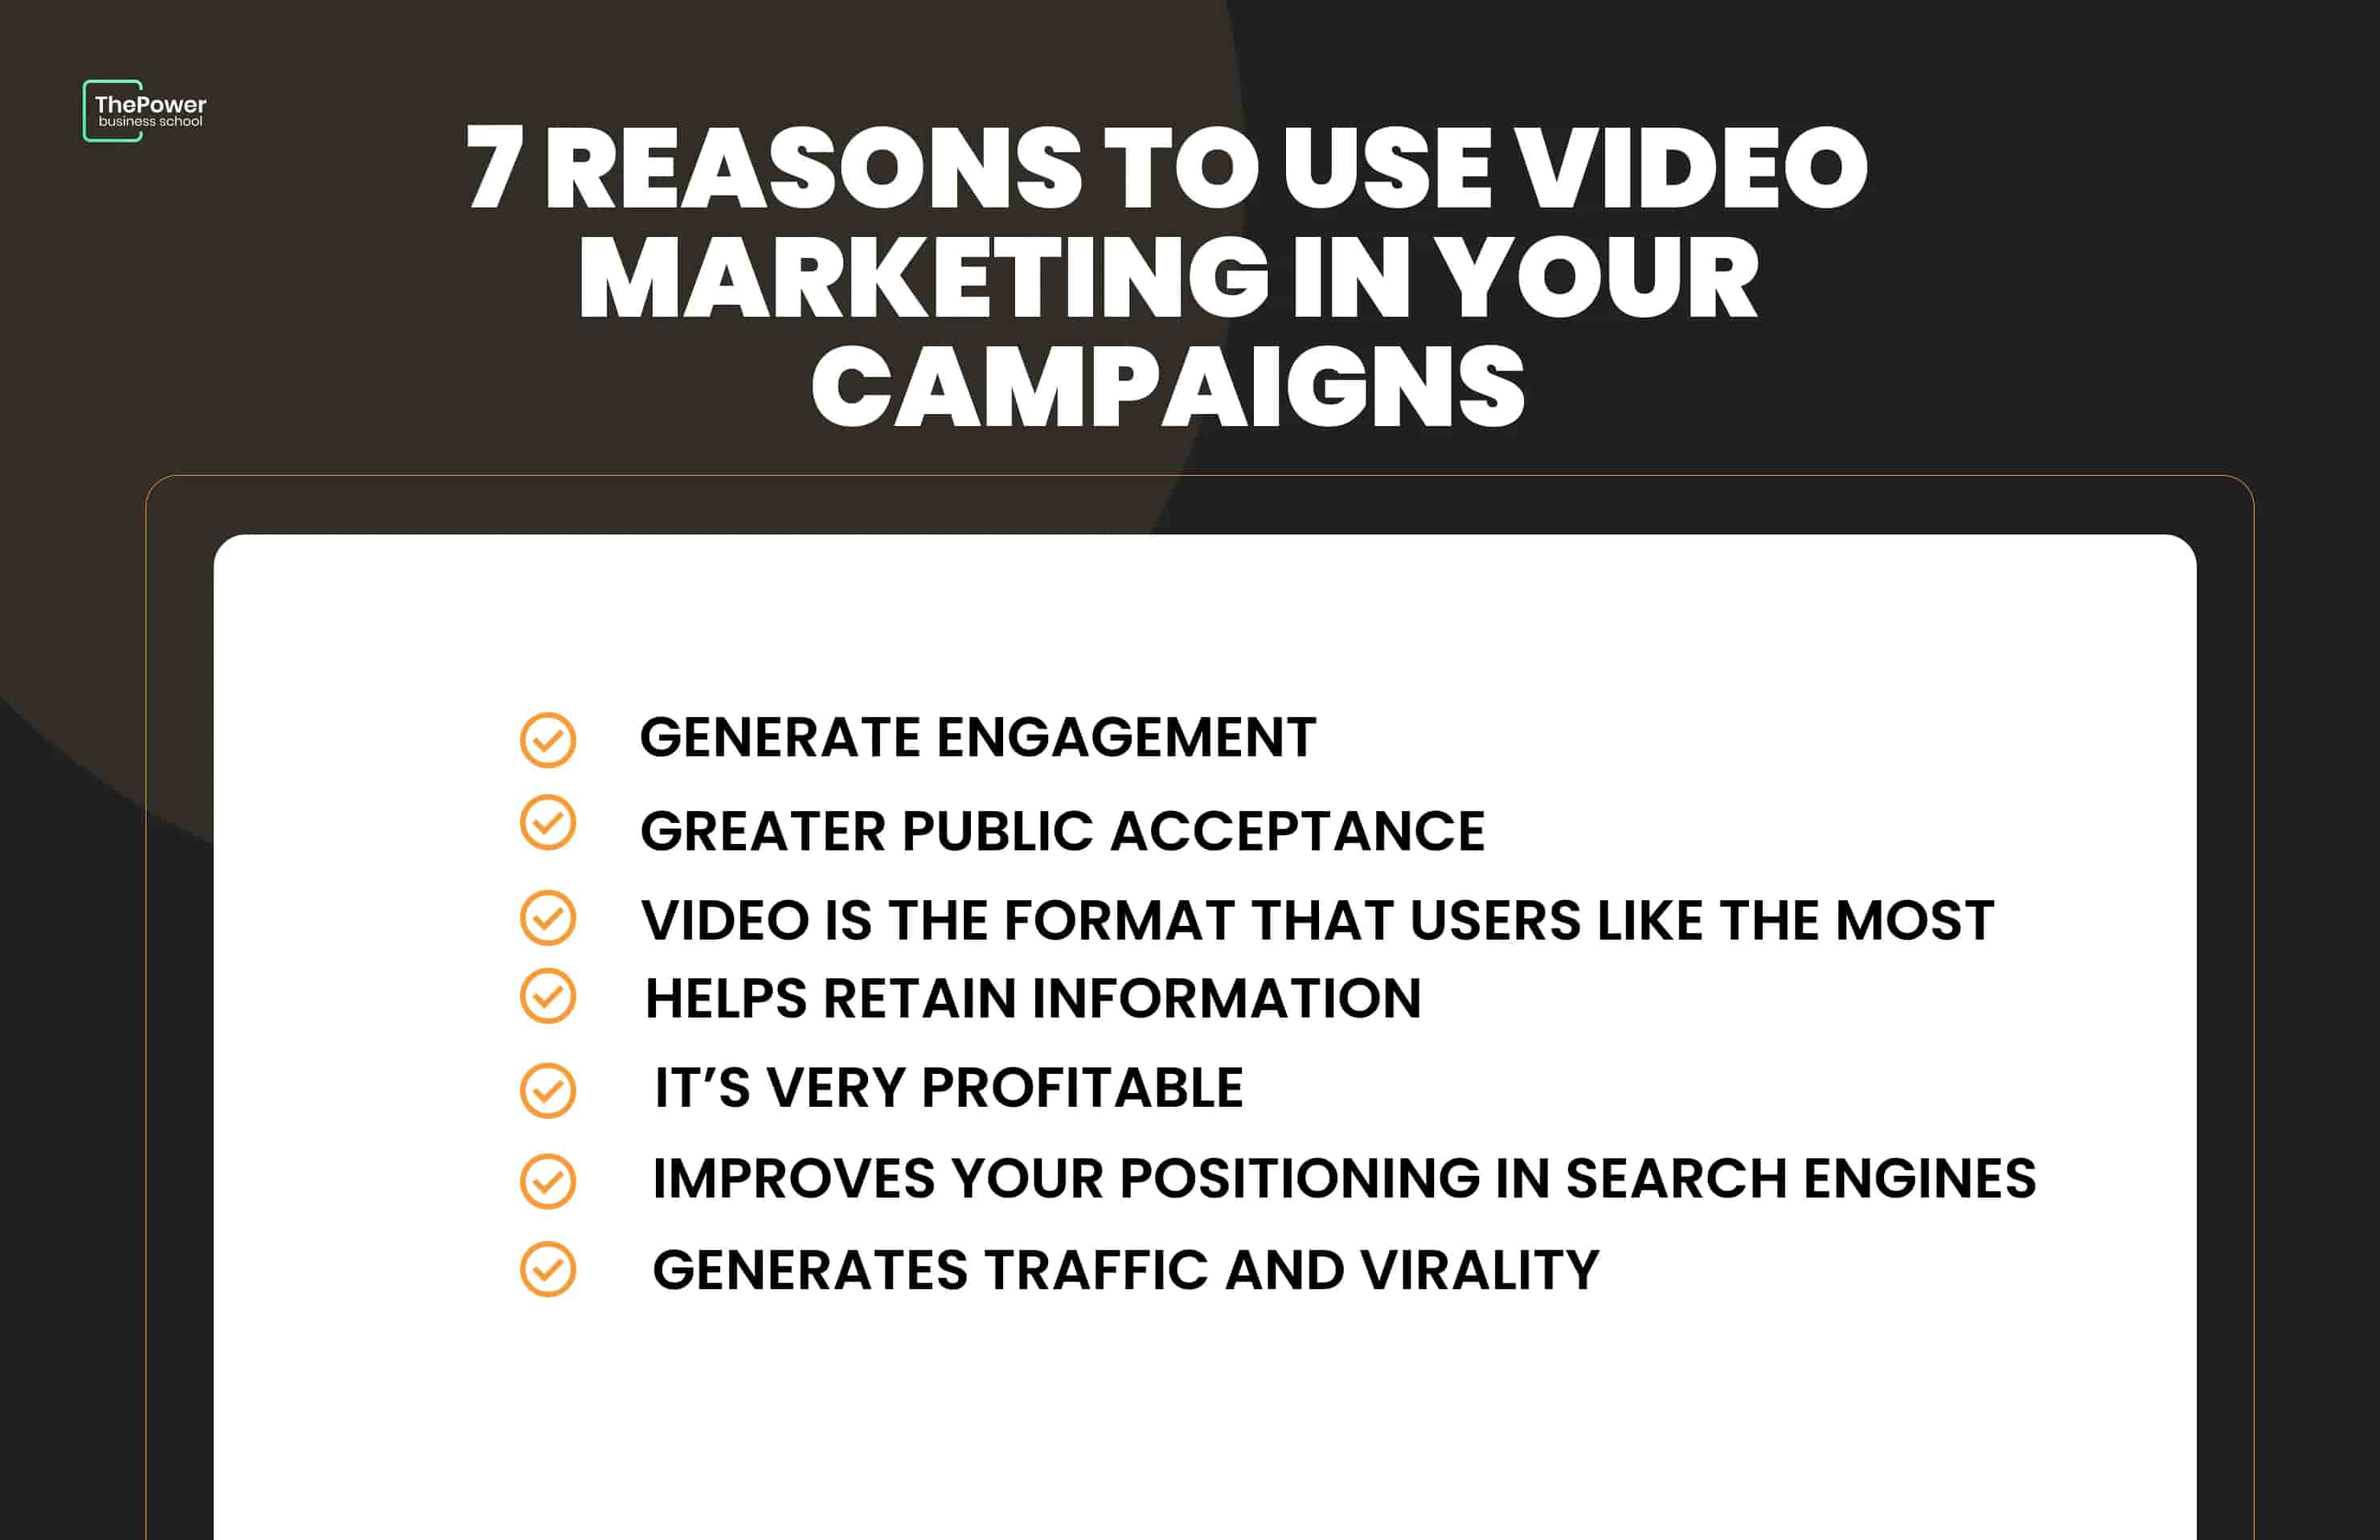 Video marketing: powerful reasons to use it in your campaigns